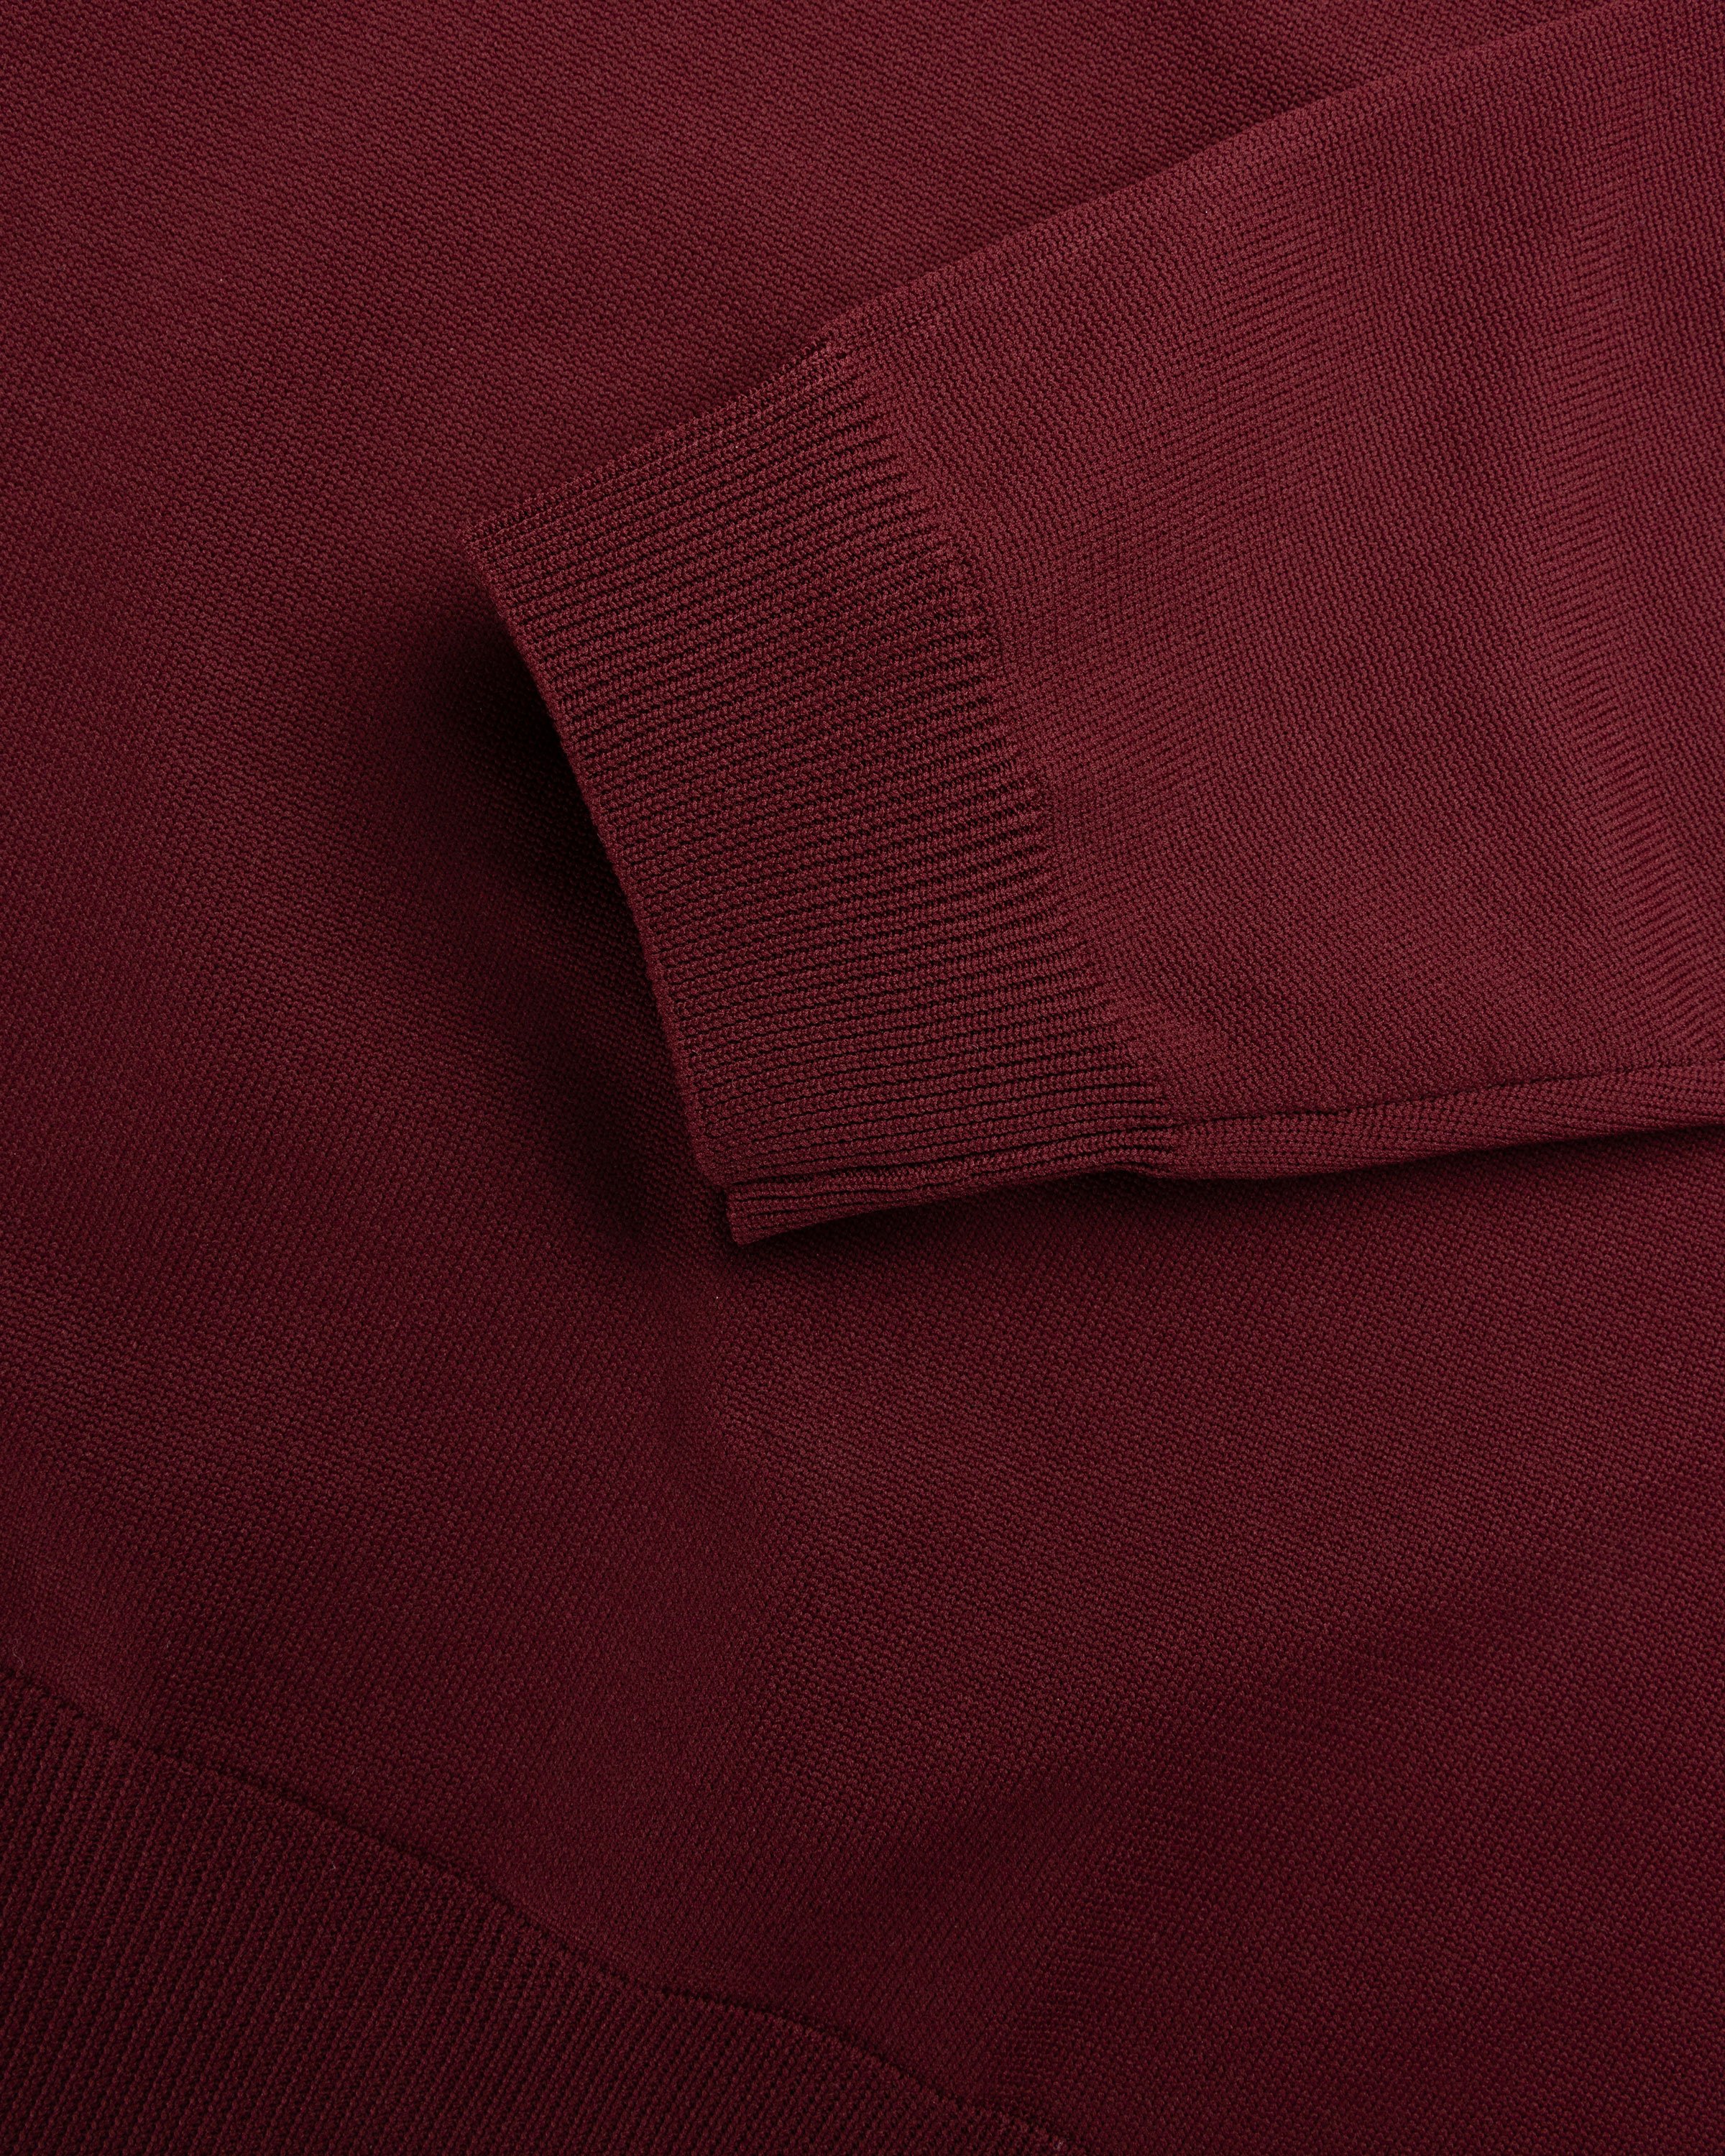 Highsnobiety HS05 - Long Sleeves Knit Polo Bordeaux - Clothing - Red - Image 7